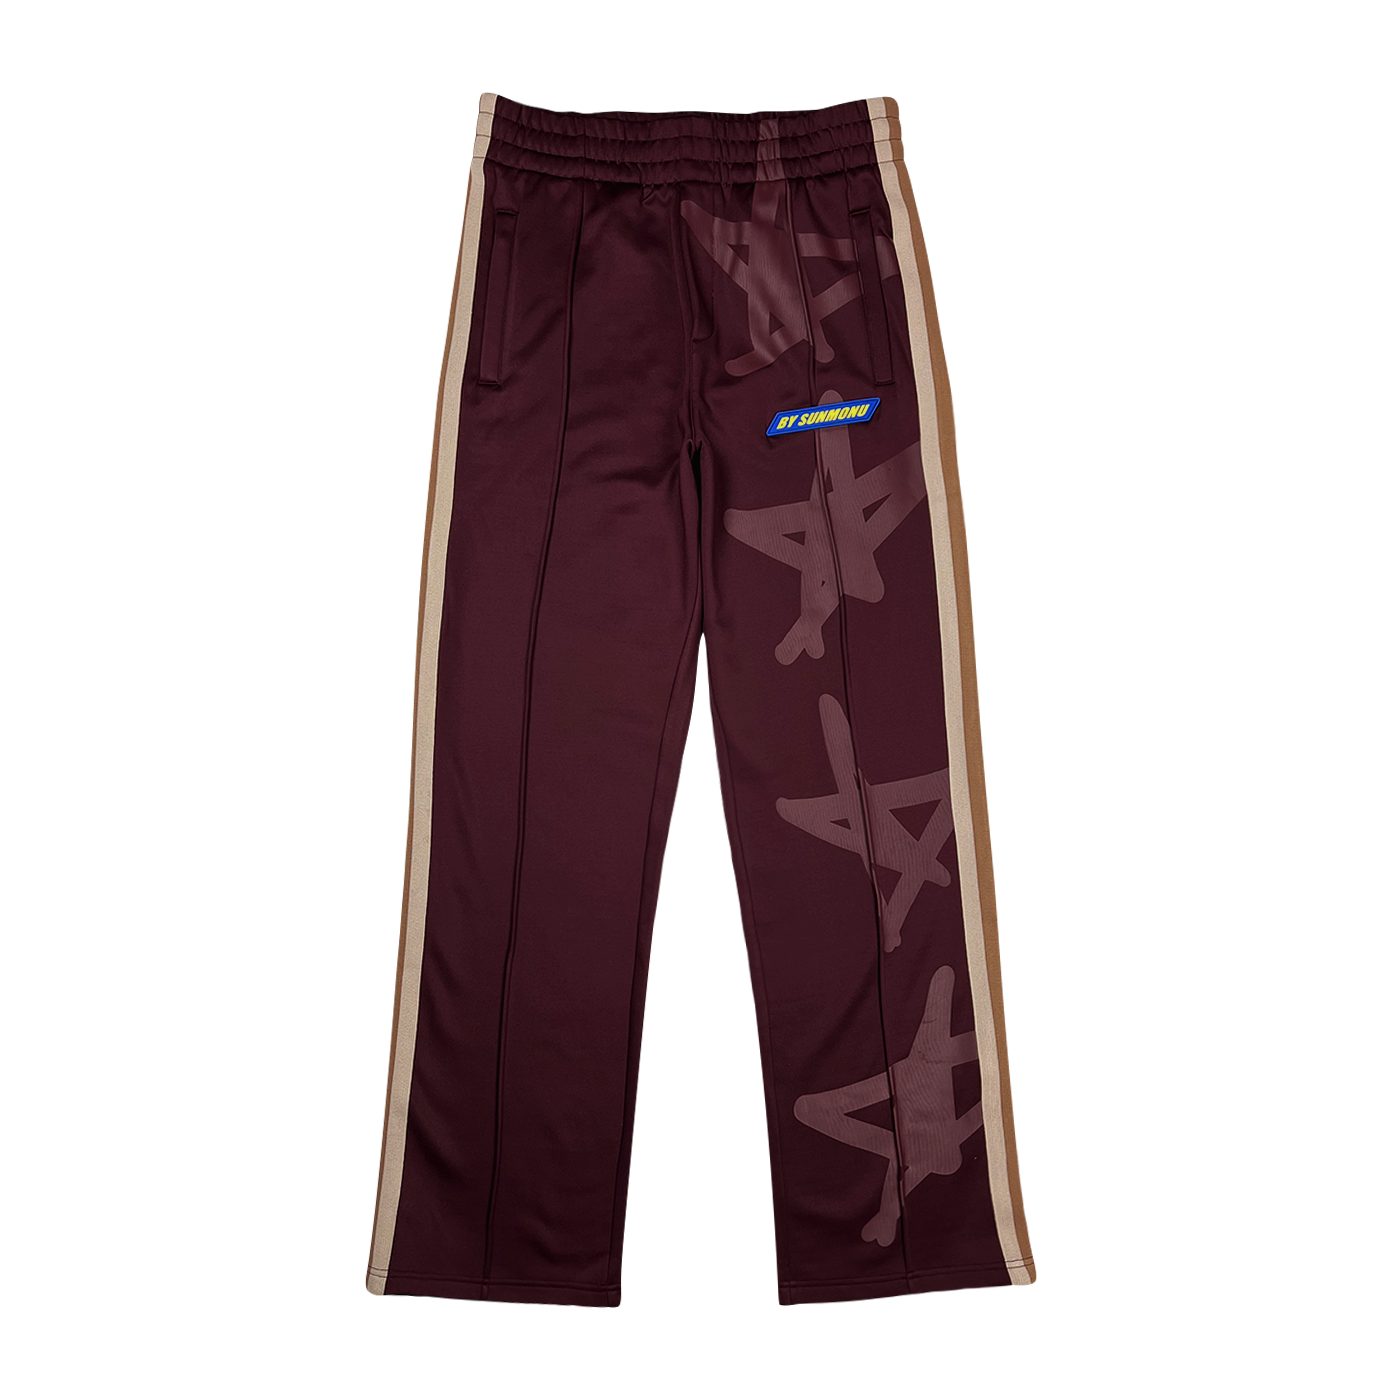 Uptown Track Pants - Bordeaux (Ships in 7-10 working days)